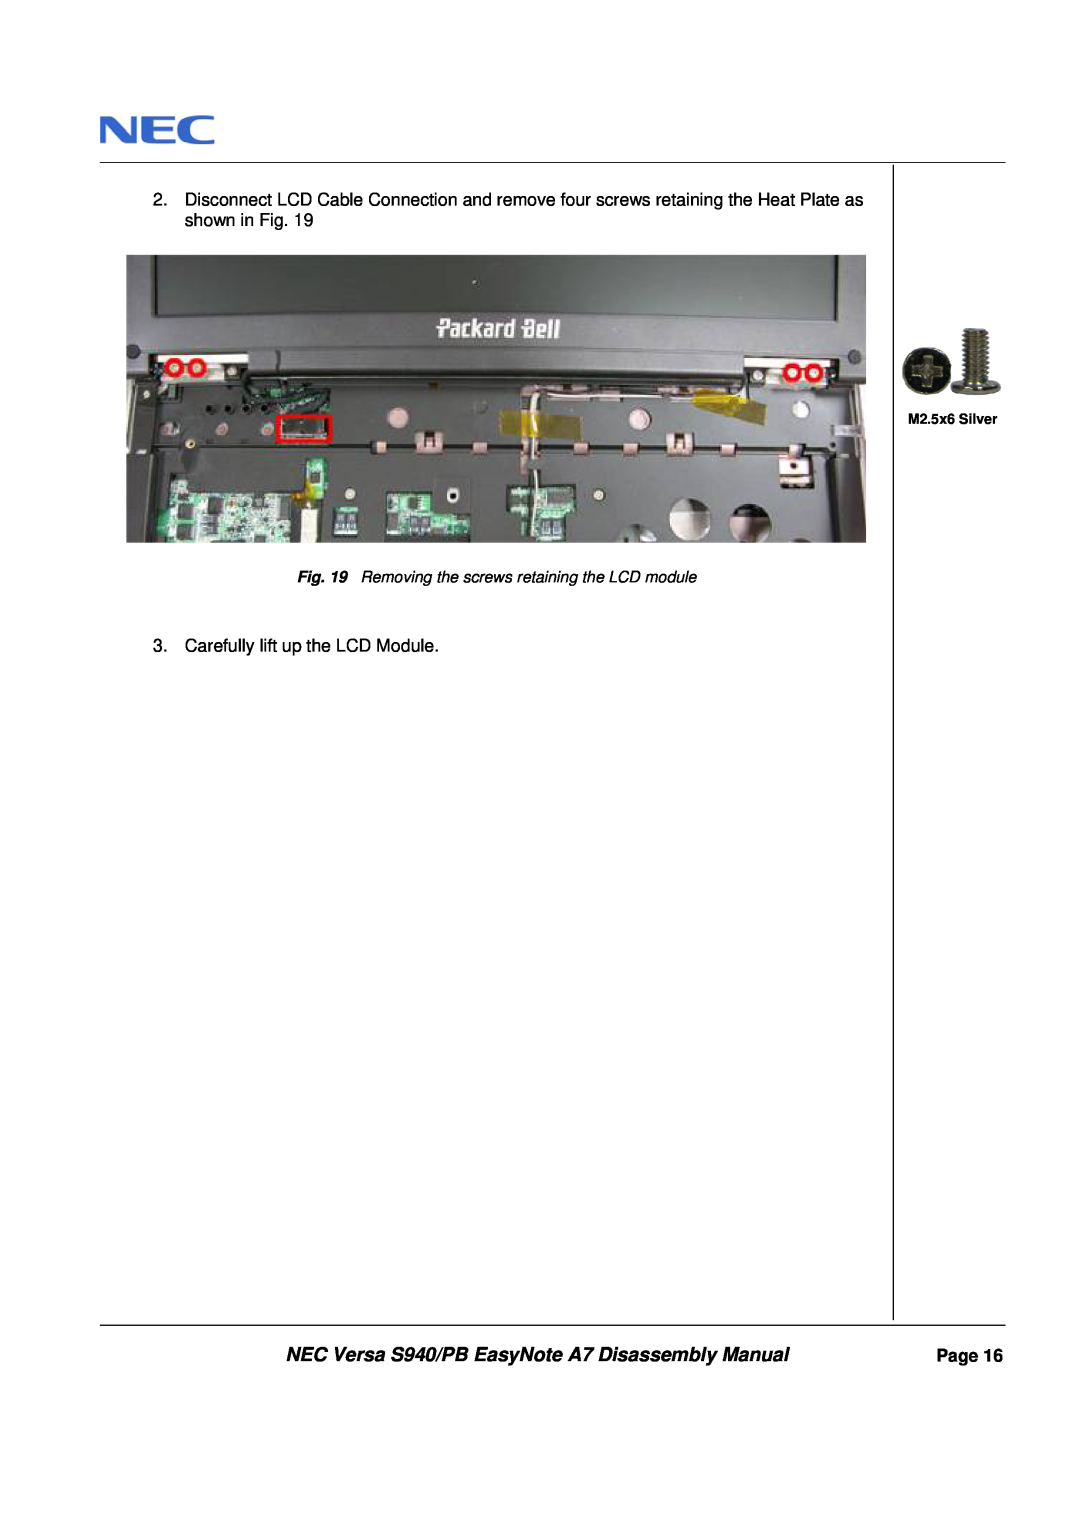 Packard Bell NEC Versa S940/PB EasyNote A7 Disassembly Manual, Carefully lift up the LCD Module, Page, M2.5x6 Silver 